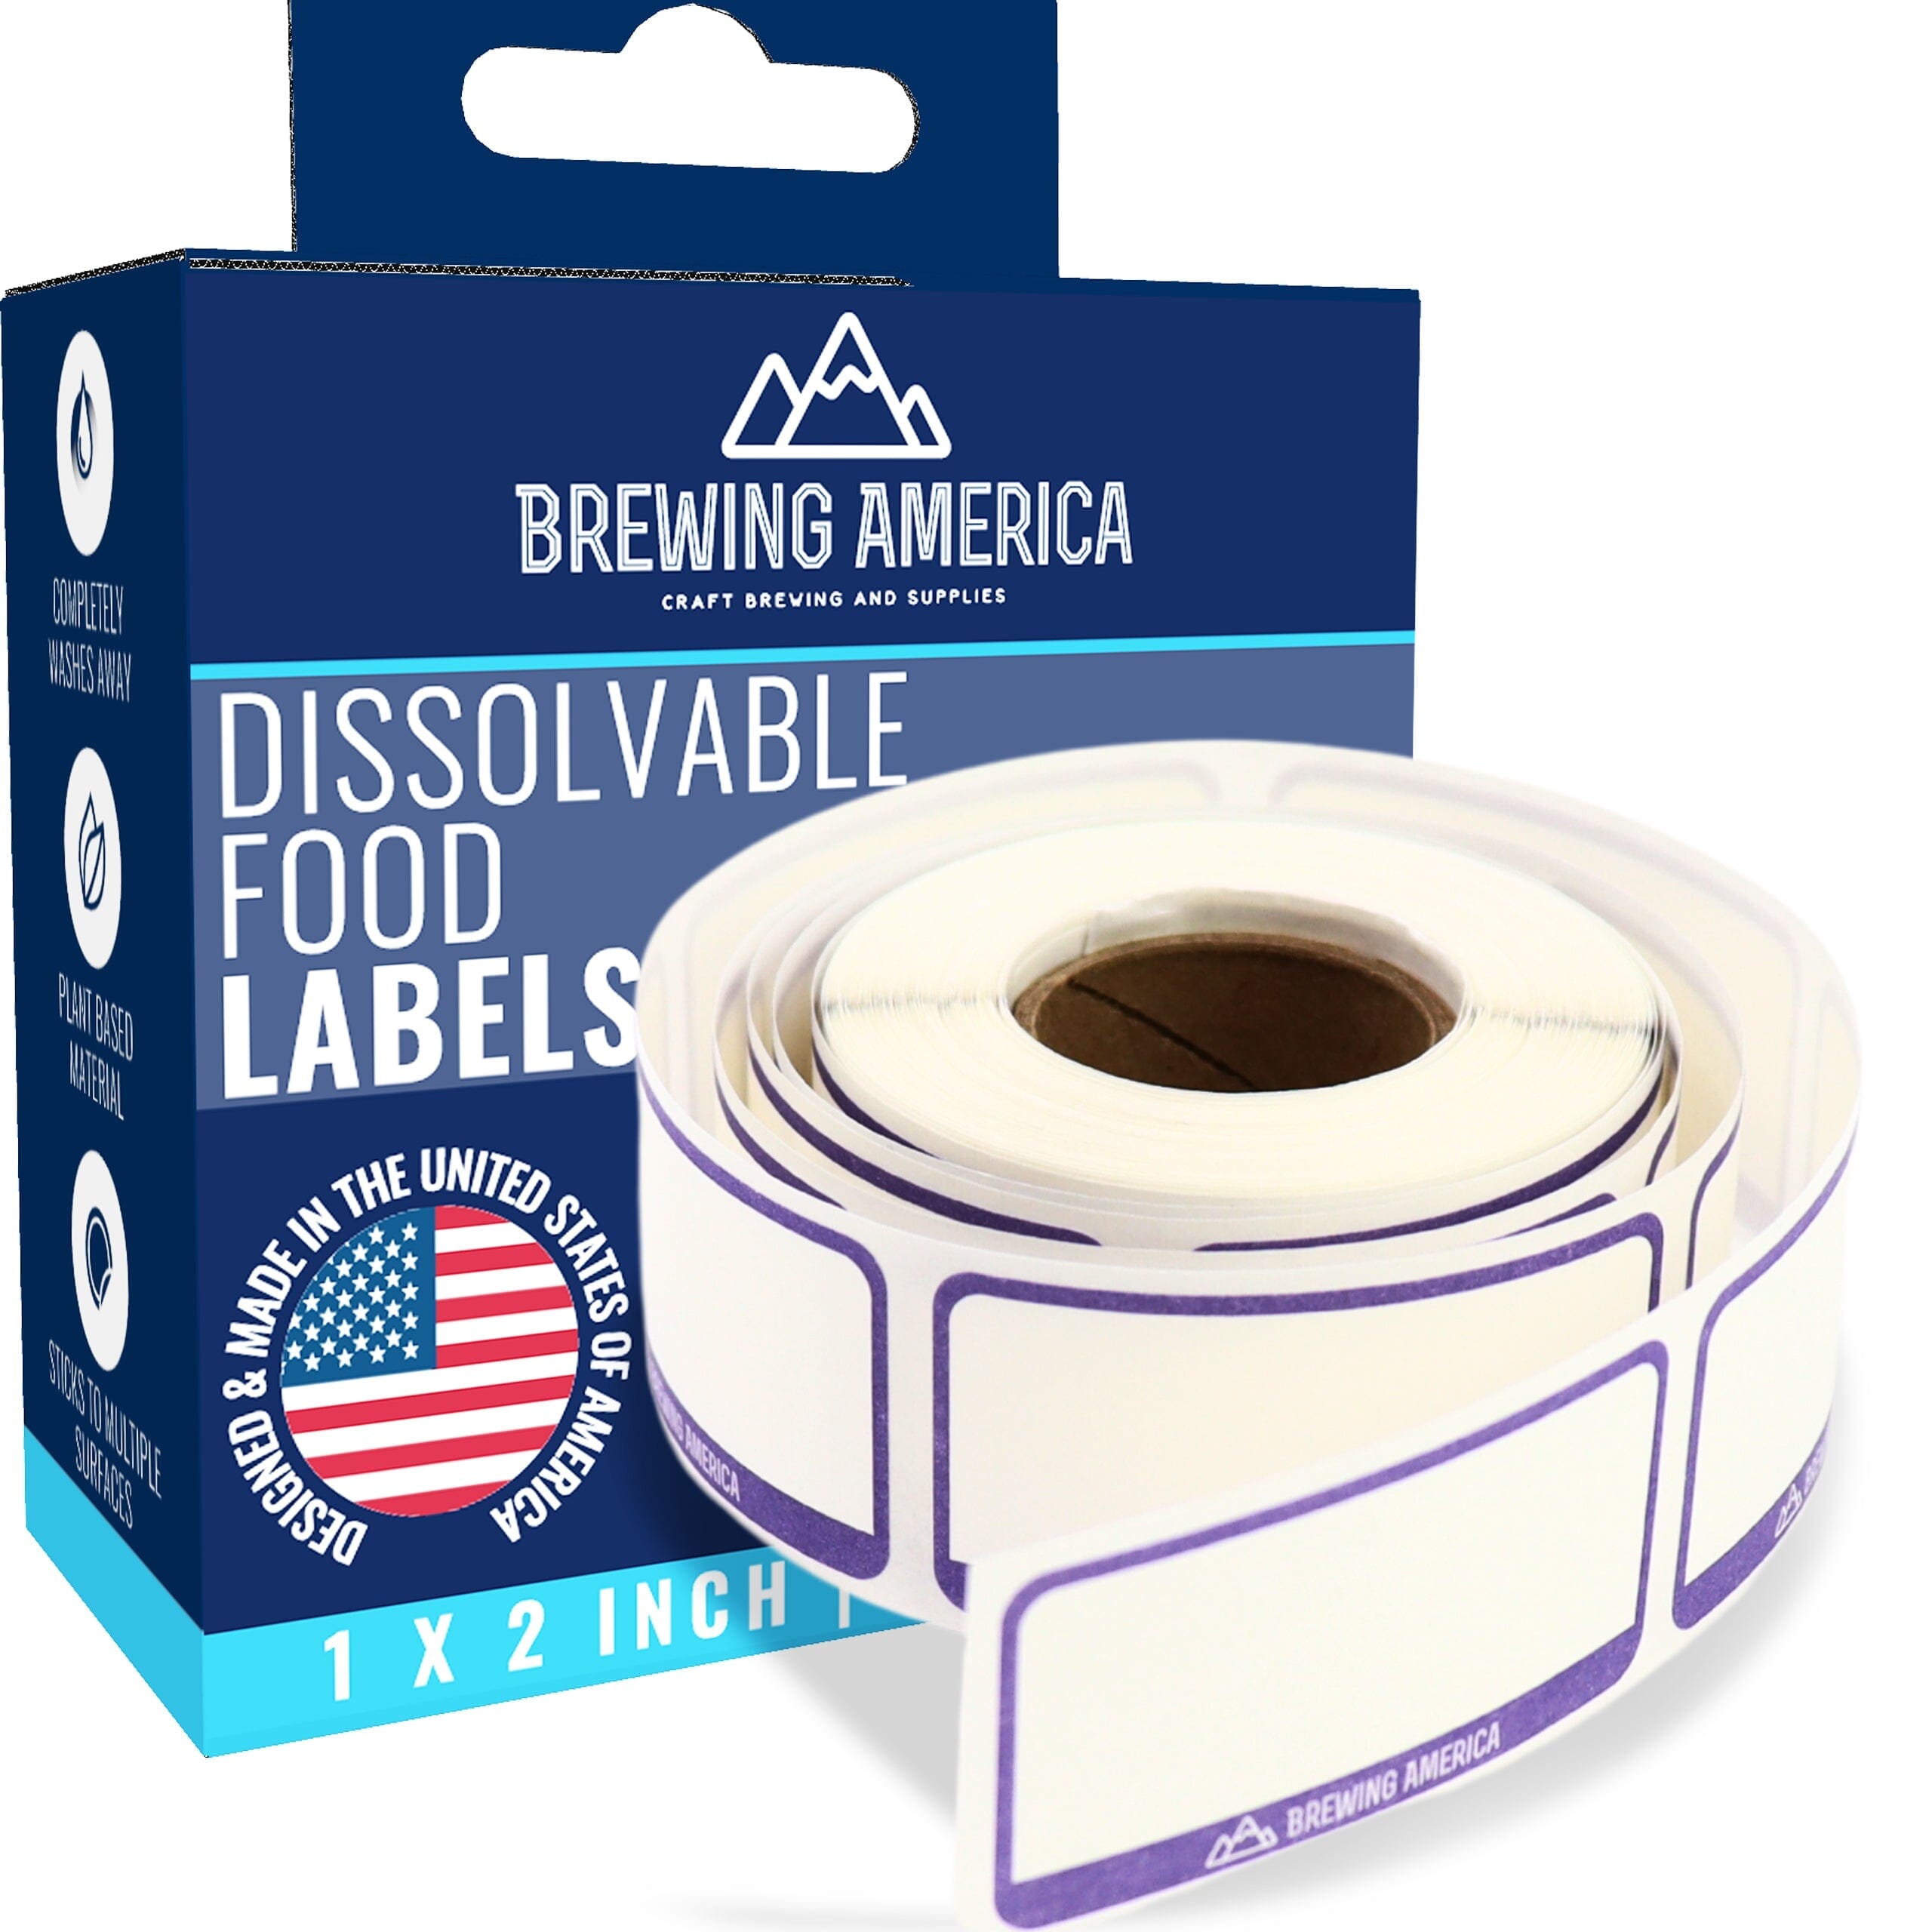 Dissolvable Food Labels for Food Containers Glass, Plastic or Metal No Scrubbing, No Residue - Violet Purple Accessories Brewing America 